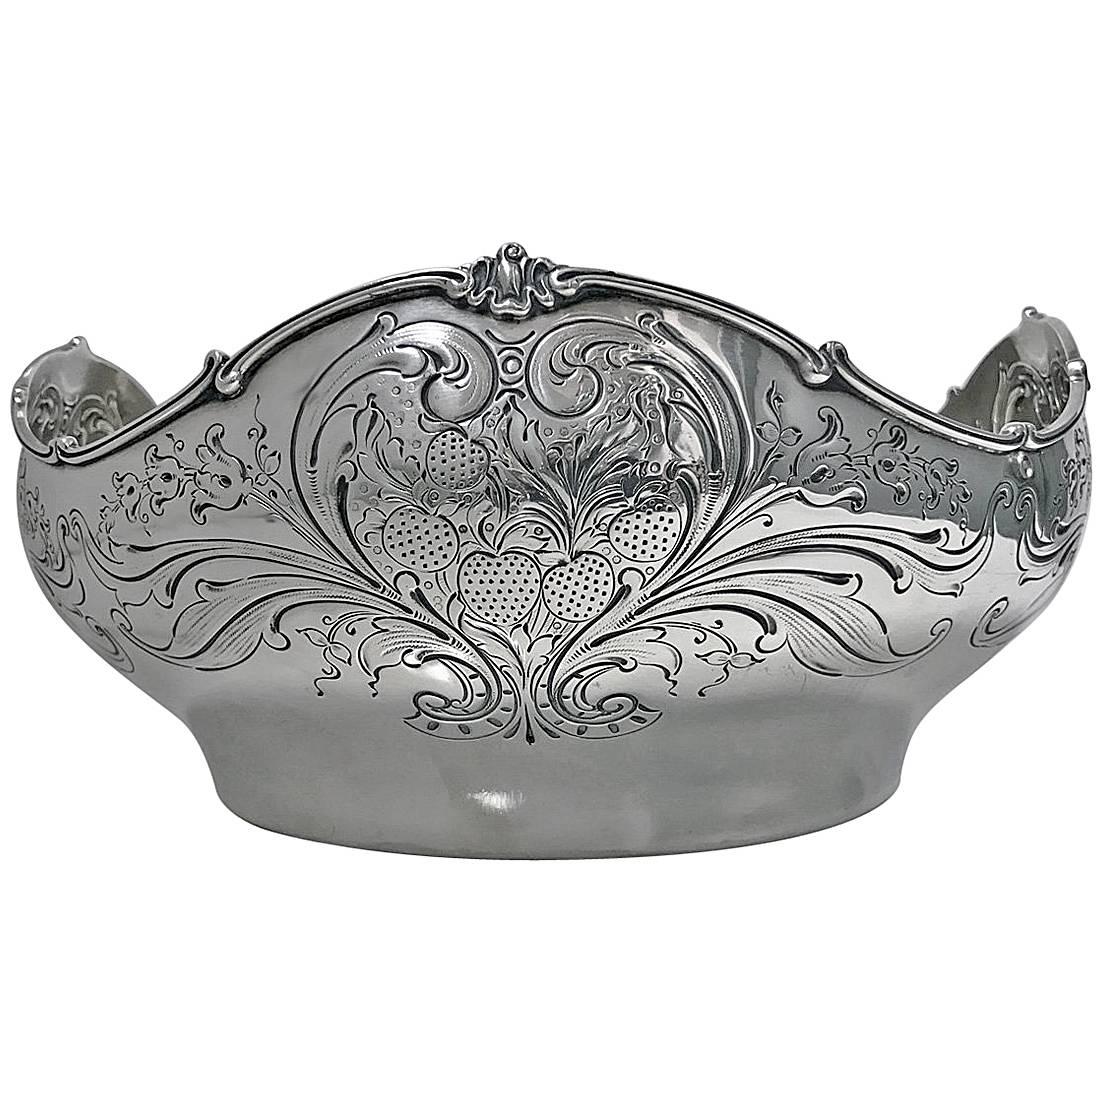 Shiebler Sterling Large Strawberry Bowl, New York, Late 19th Century